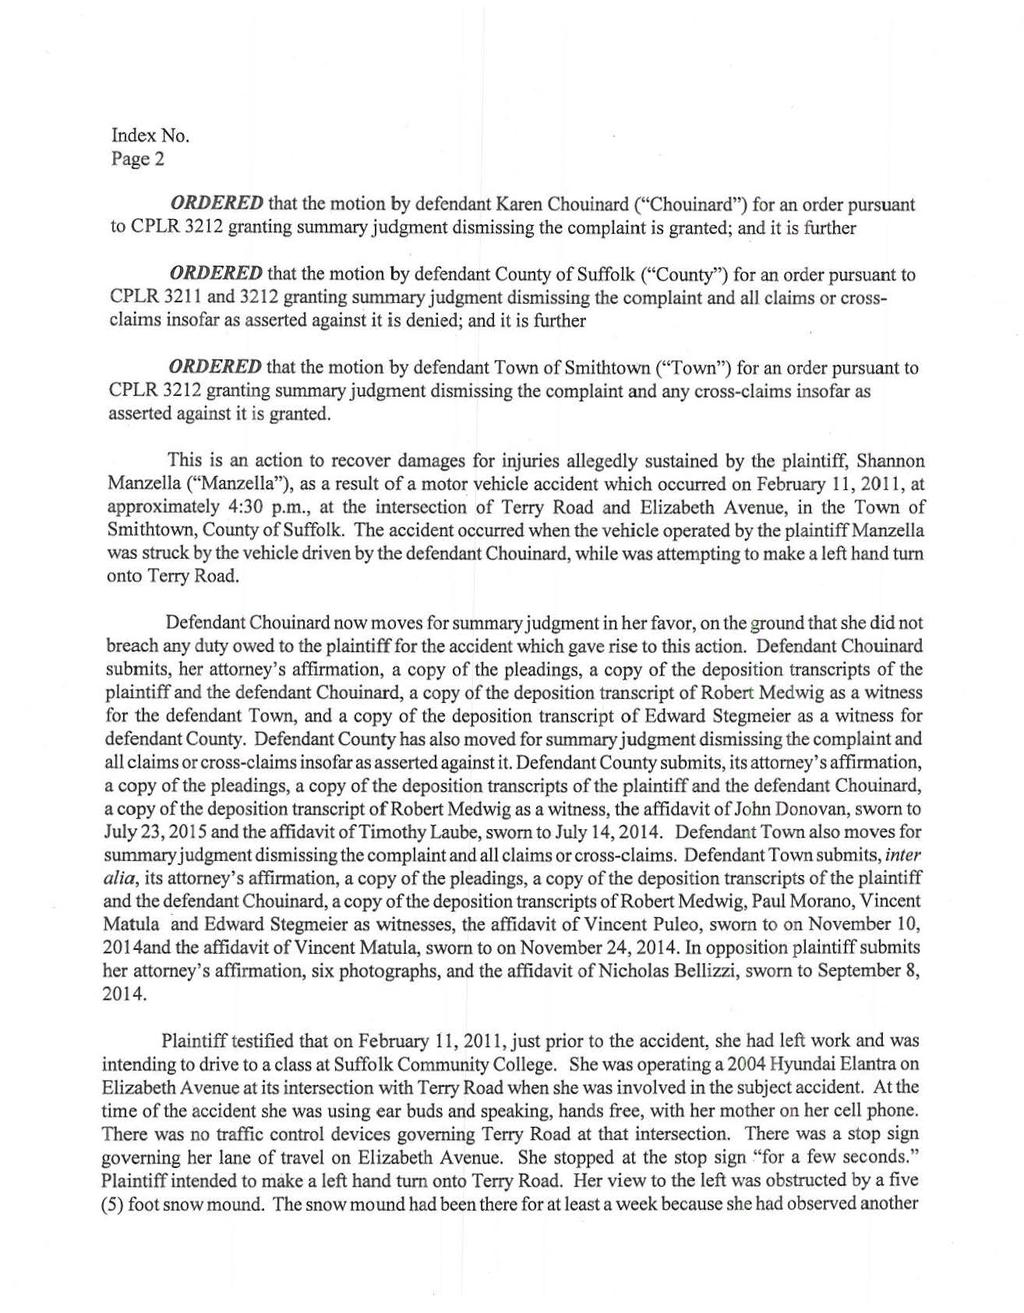 [* 2] Page 2 ORDERED that the motion by defendant Karen Chouinard ("Chouinard") for an order pursuant to CPLR 3212 granting summary judgment dismissing the complaint is granted; and it is further